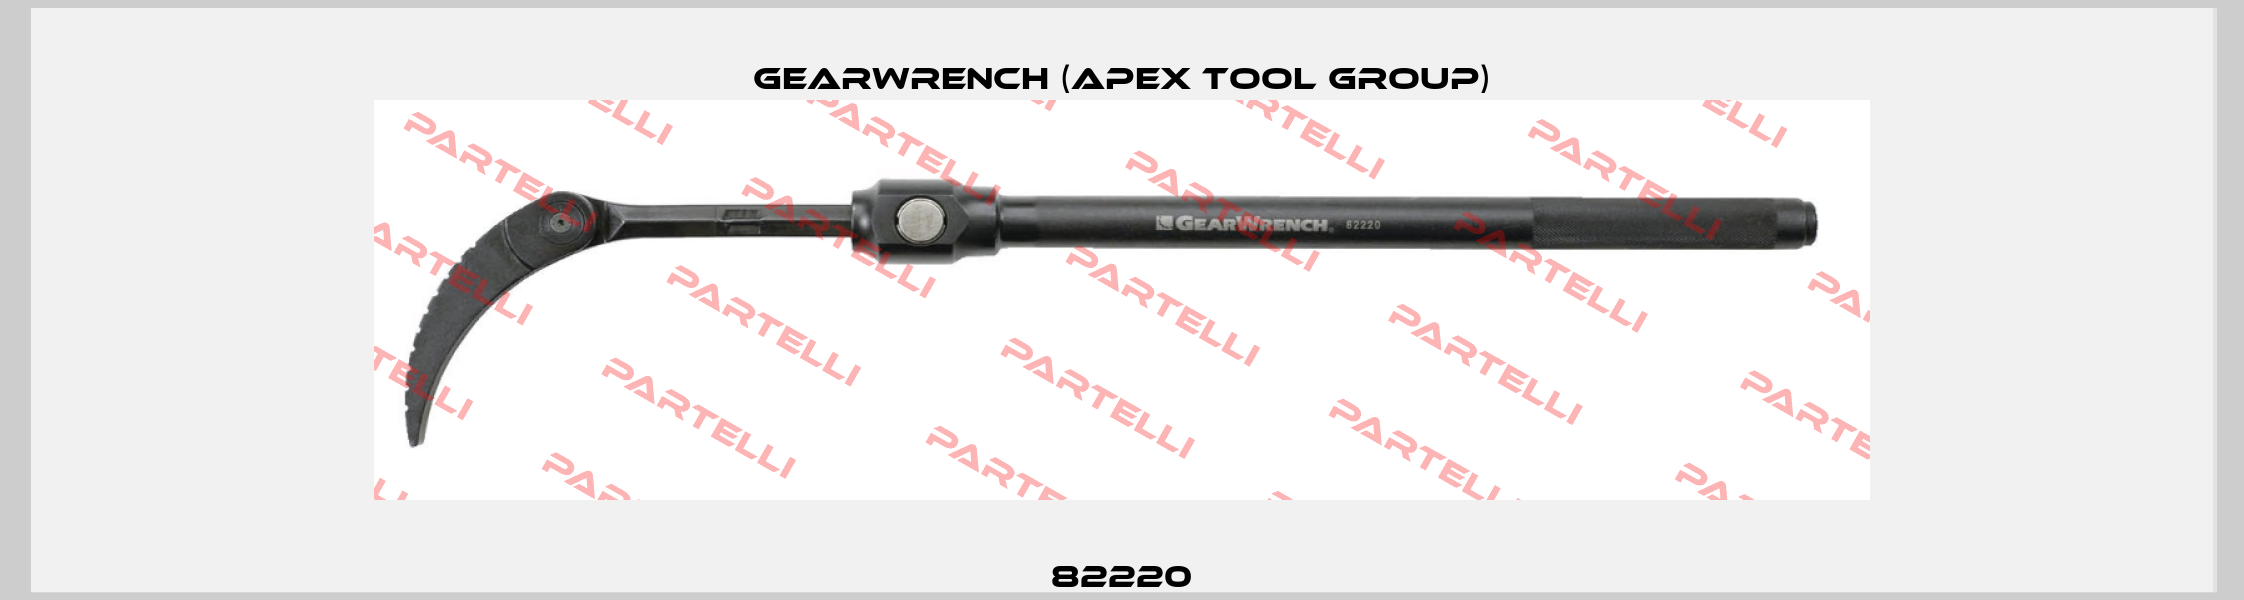 82220 GEARWRENCH (Apex Tool Group)